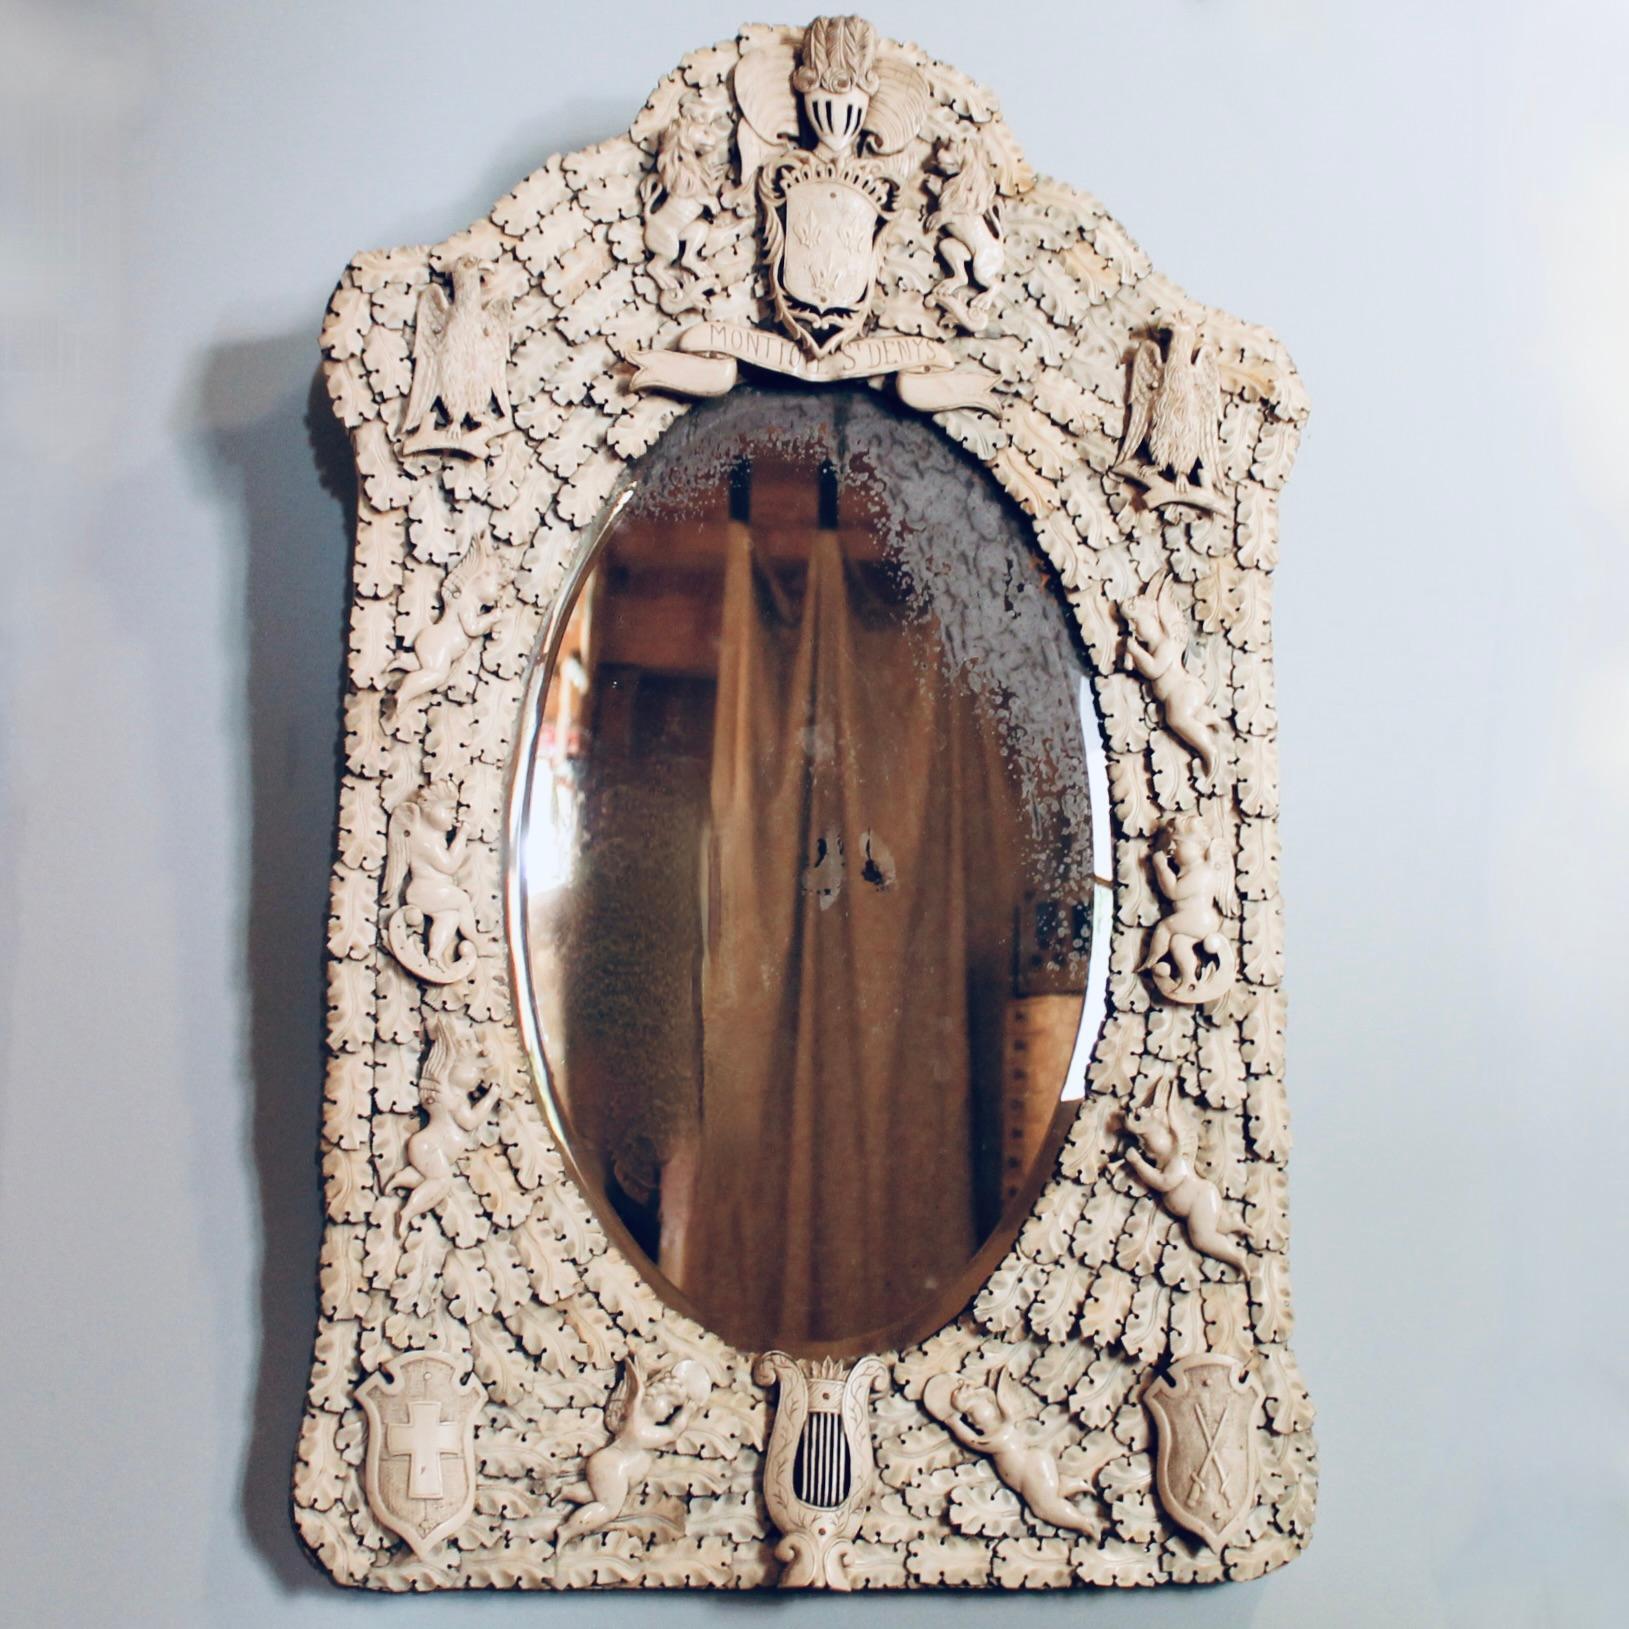 A very finely carved whale bone ivory tessellated mirror, a specialty of the ivory carvers of Dieppe, on the coast of Normandy in the 19th century. The frame is comprised of overlapping oak leaves arranged in a cartouche shape, centered on the